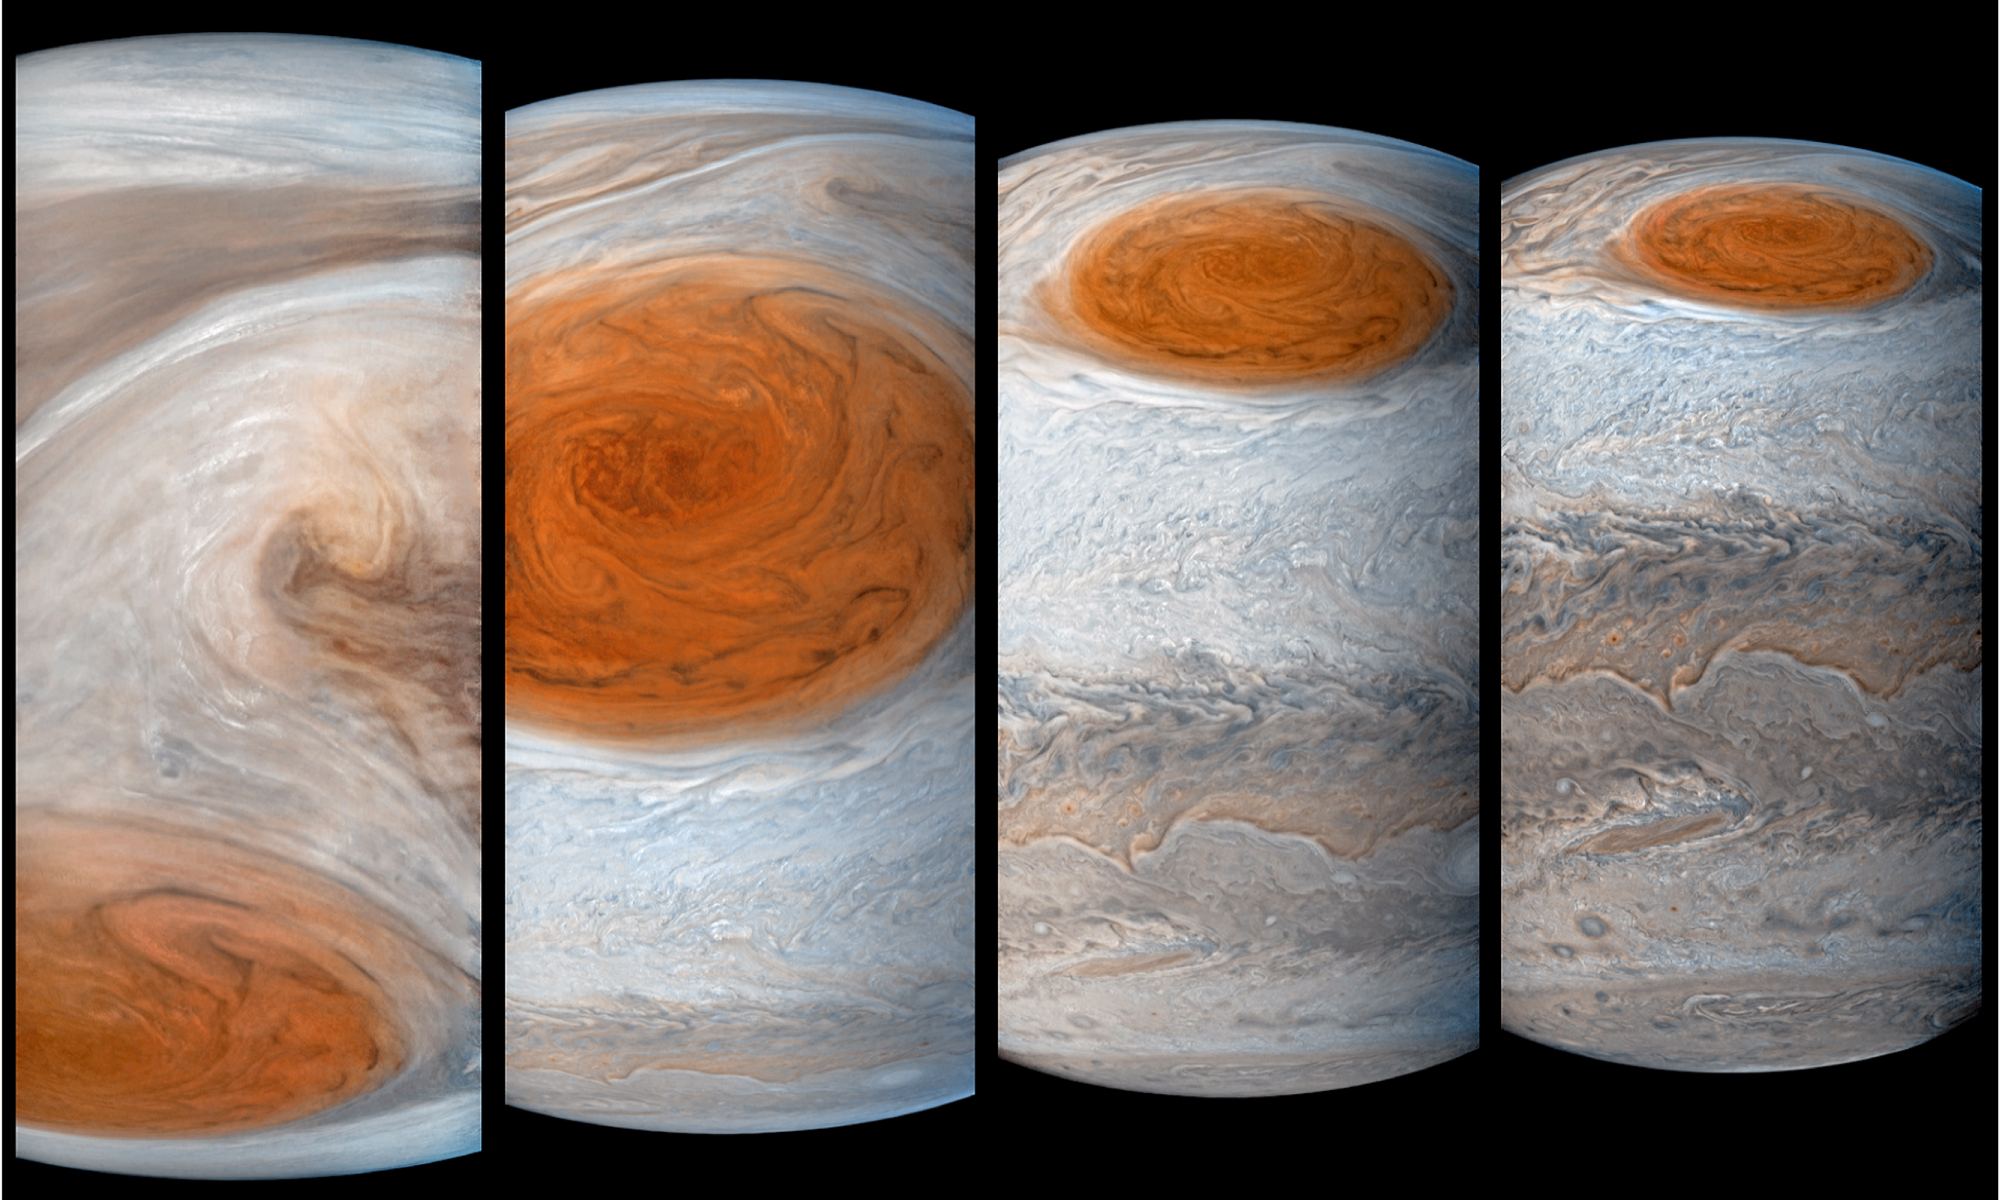 JunoCam captured these images of the Great Red Spot during the July 2017 fly-by of Jupiter. The composite images provide a richly-detailed look at the storm. Image: Sánchez-Lavega et al. 2018; composed by G. Eichstadt and J. Cowart